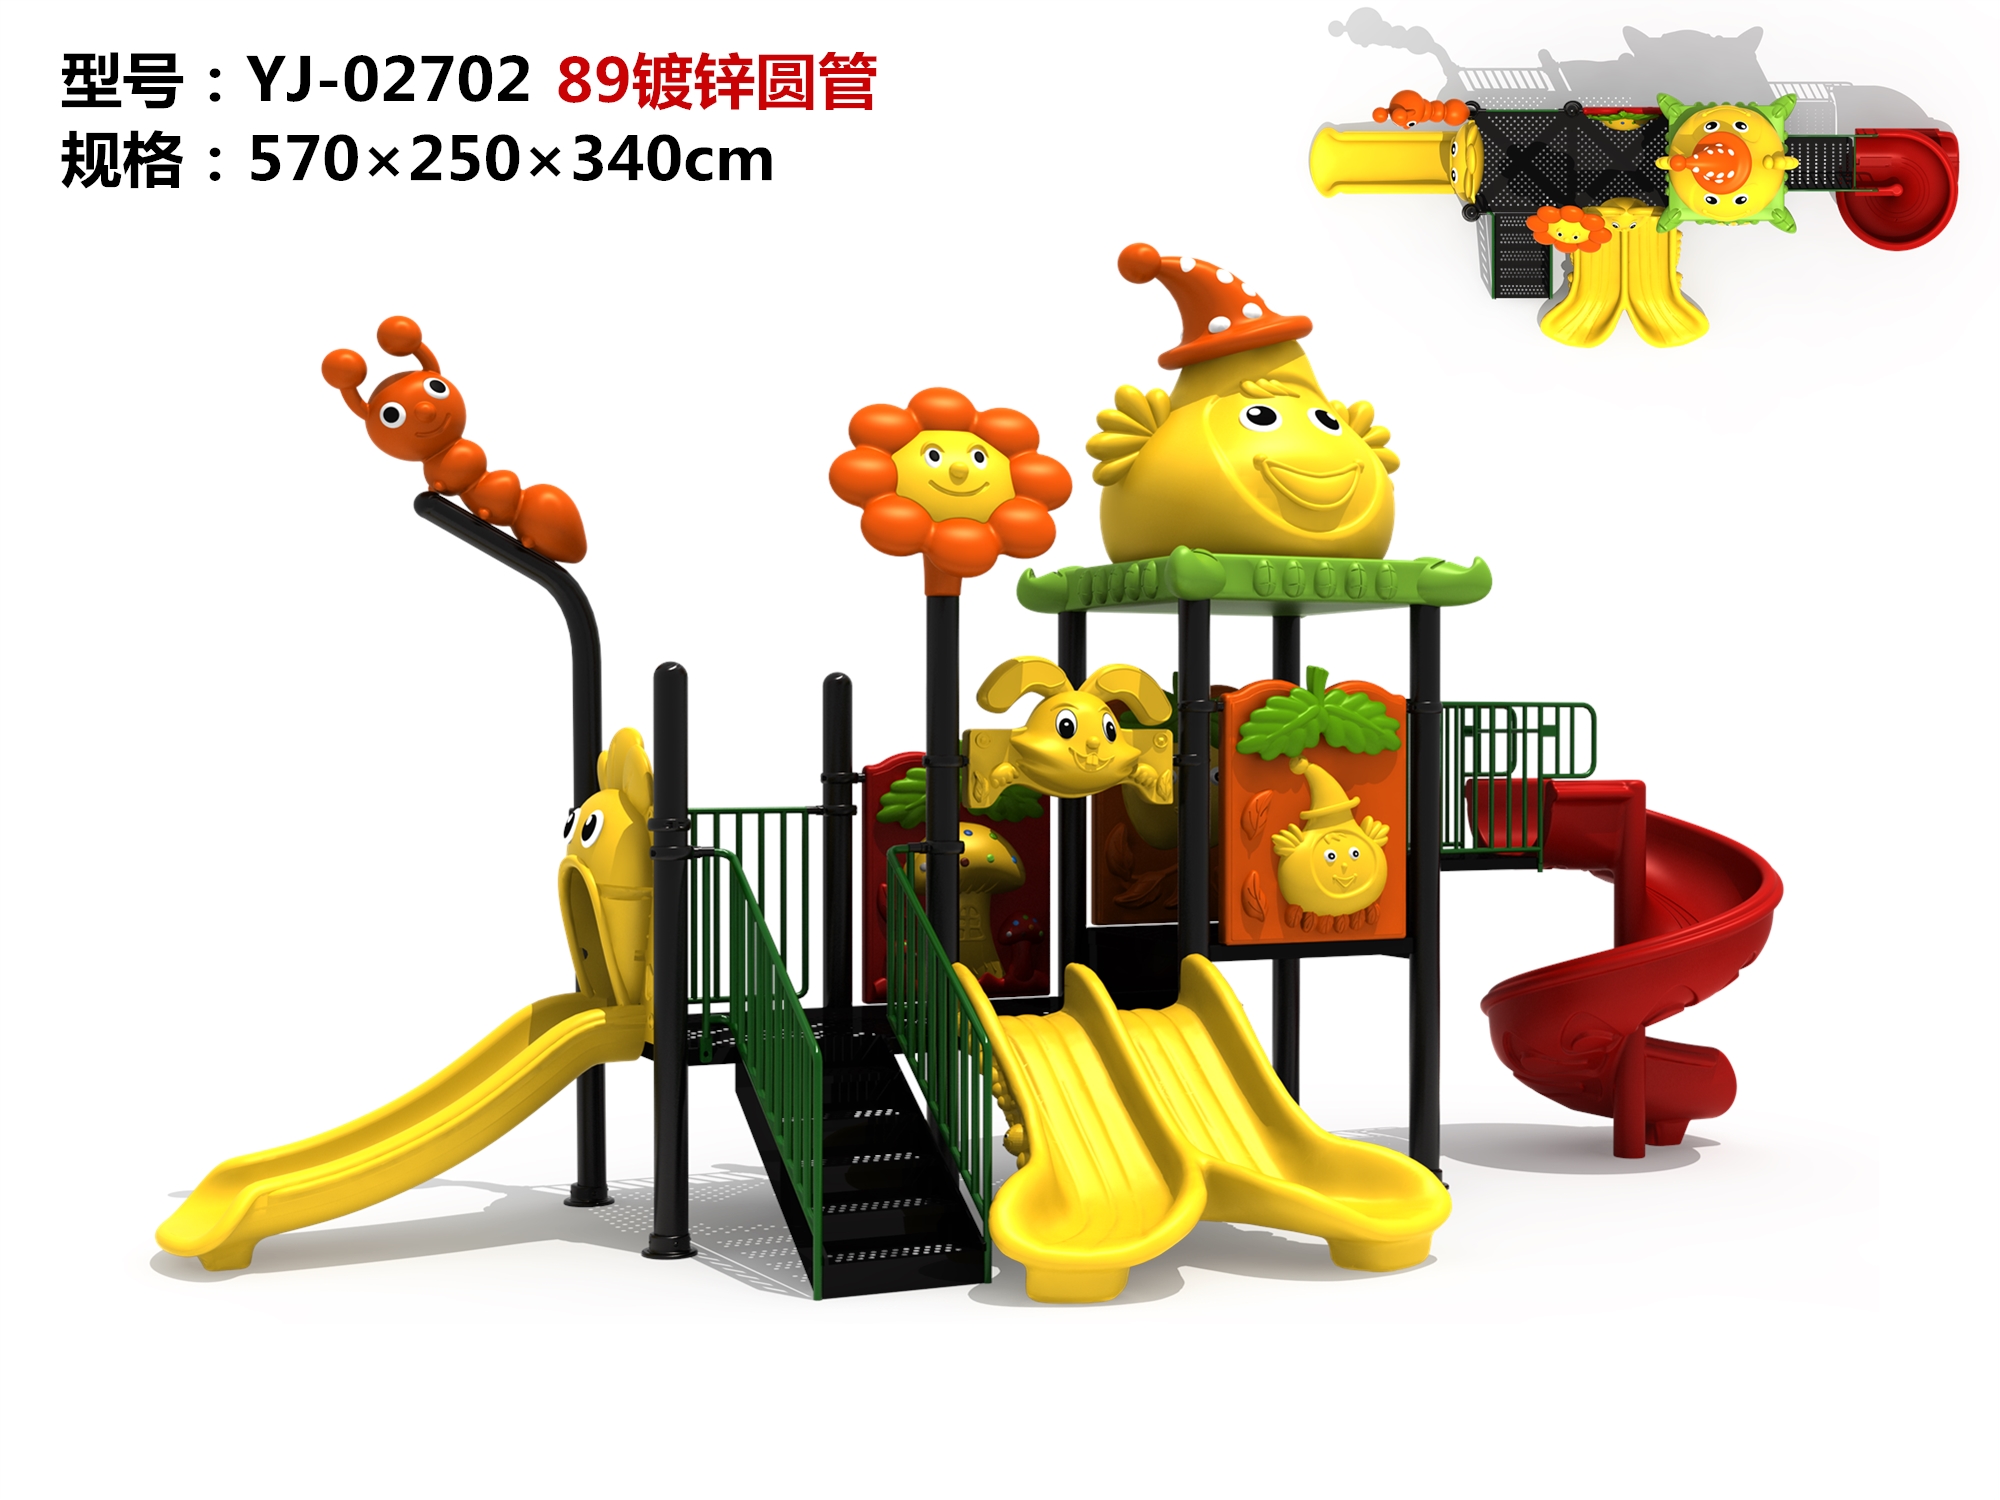 wooden playsets near me